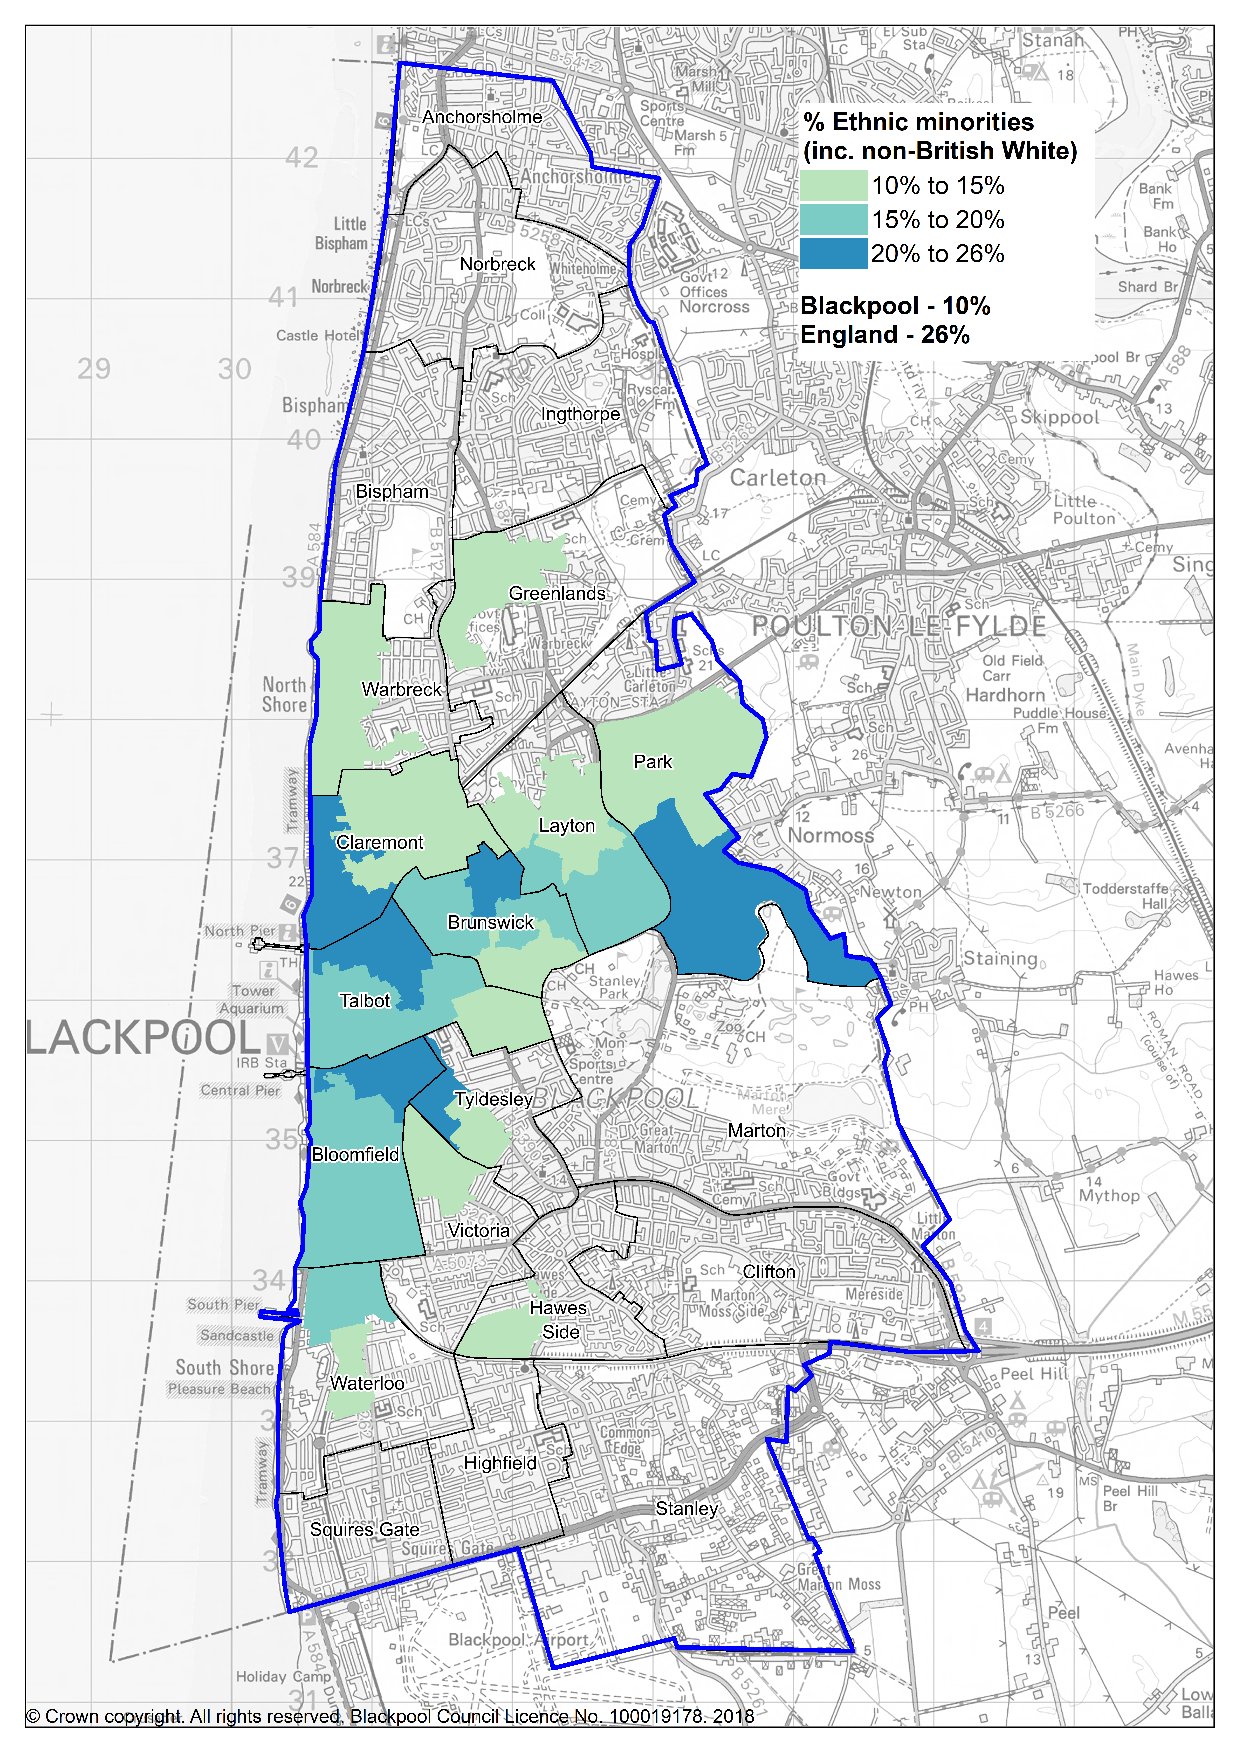 Census 2021 map of proportions of ethnic minority groups across Blackpool wards, with higher proportions in central and Grange Park / hospital areas